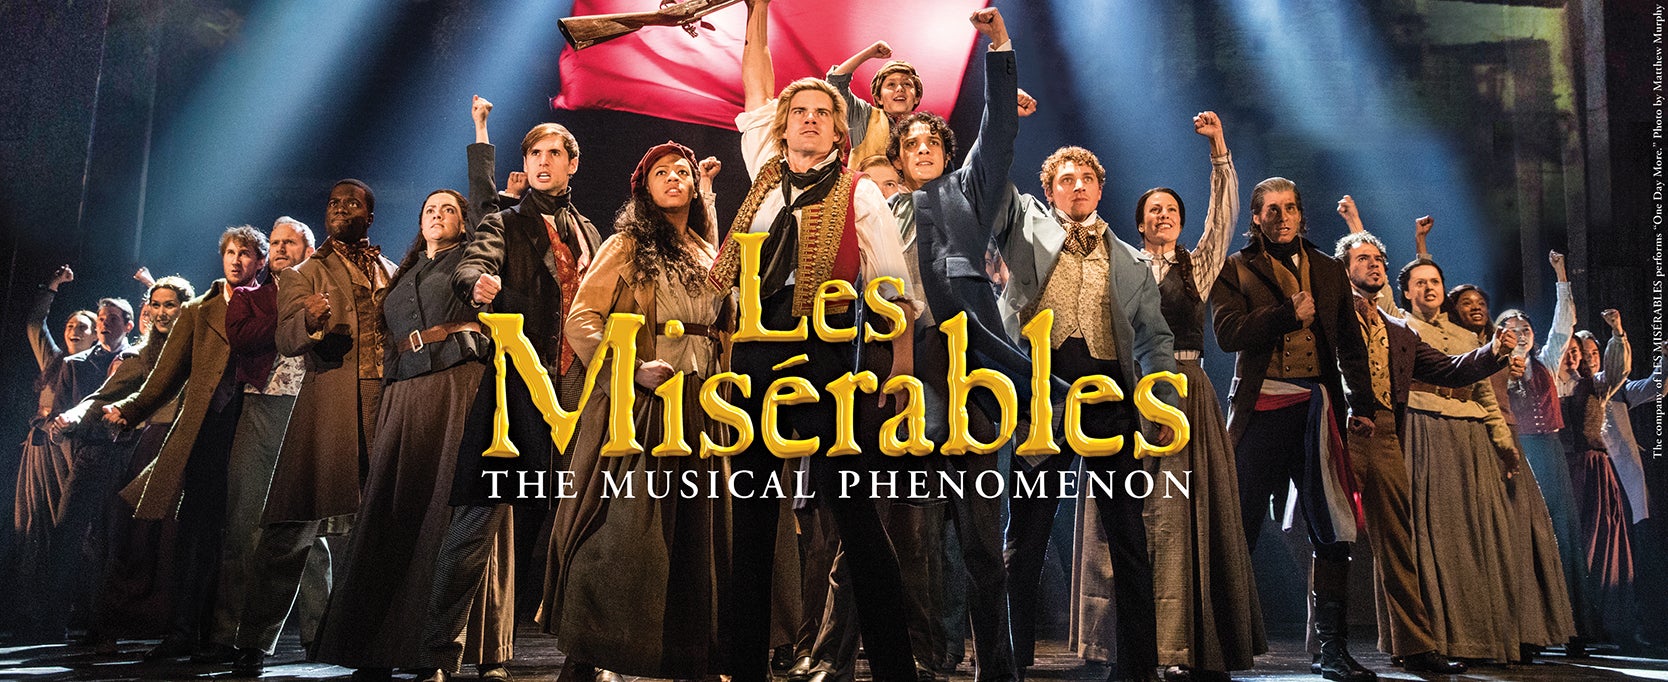 Top 10 best Broadway musicals of all time wles misérables musical broadway